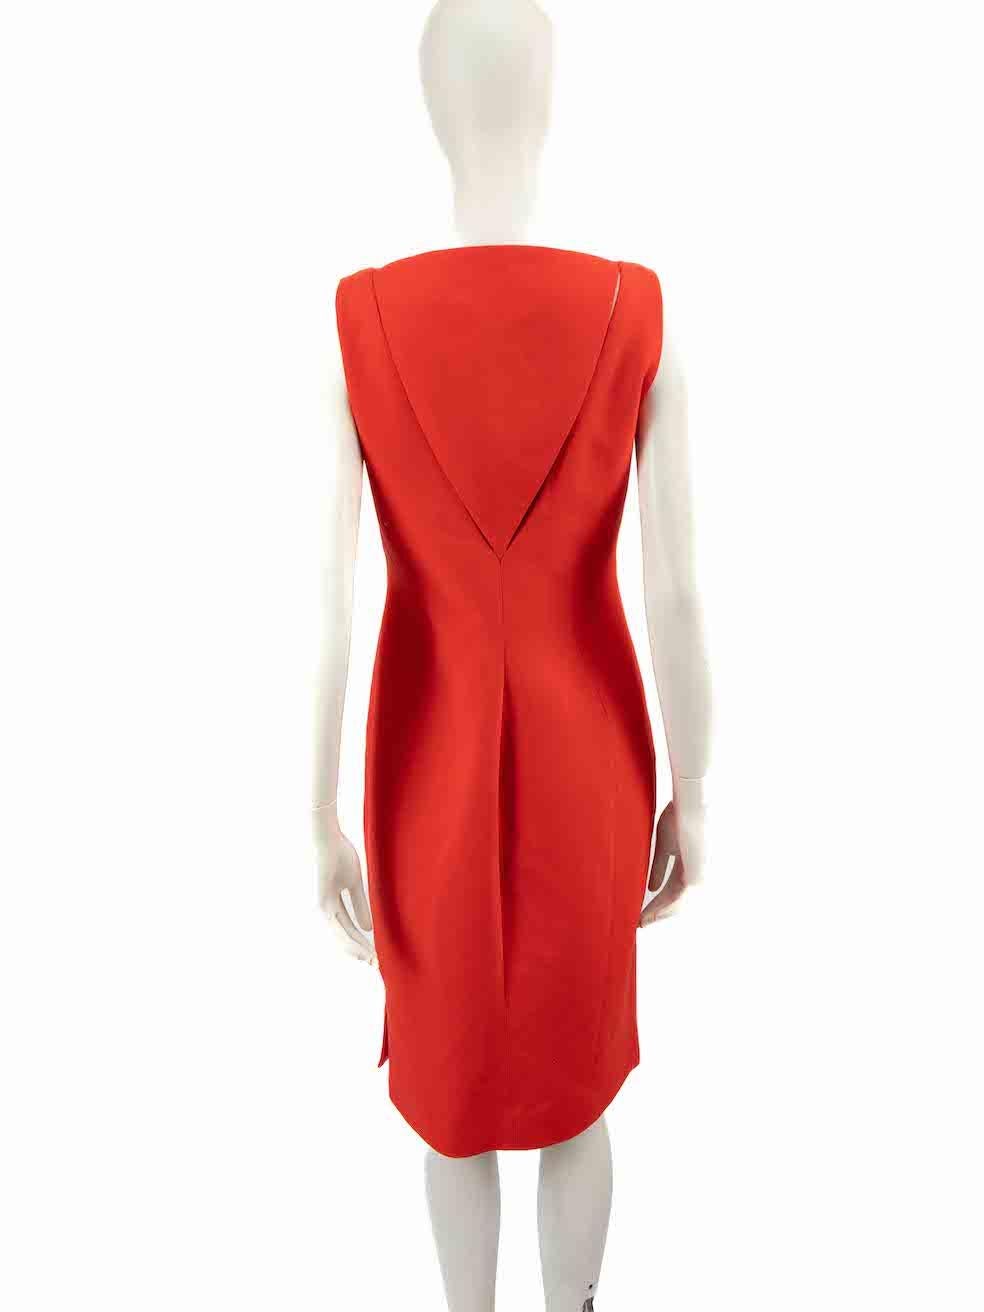 Antonio Berardi Red Side Zipper Detail Dress Size XL In Excellent Condition For Sale In London, GB